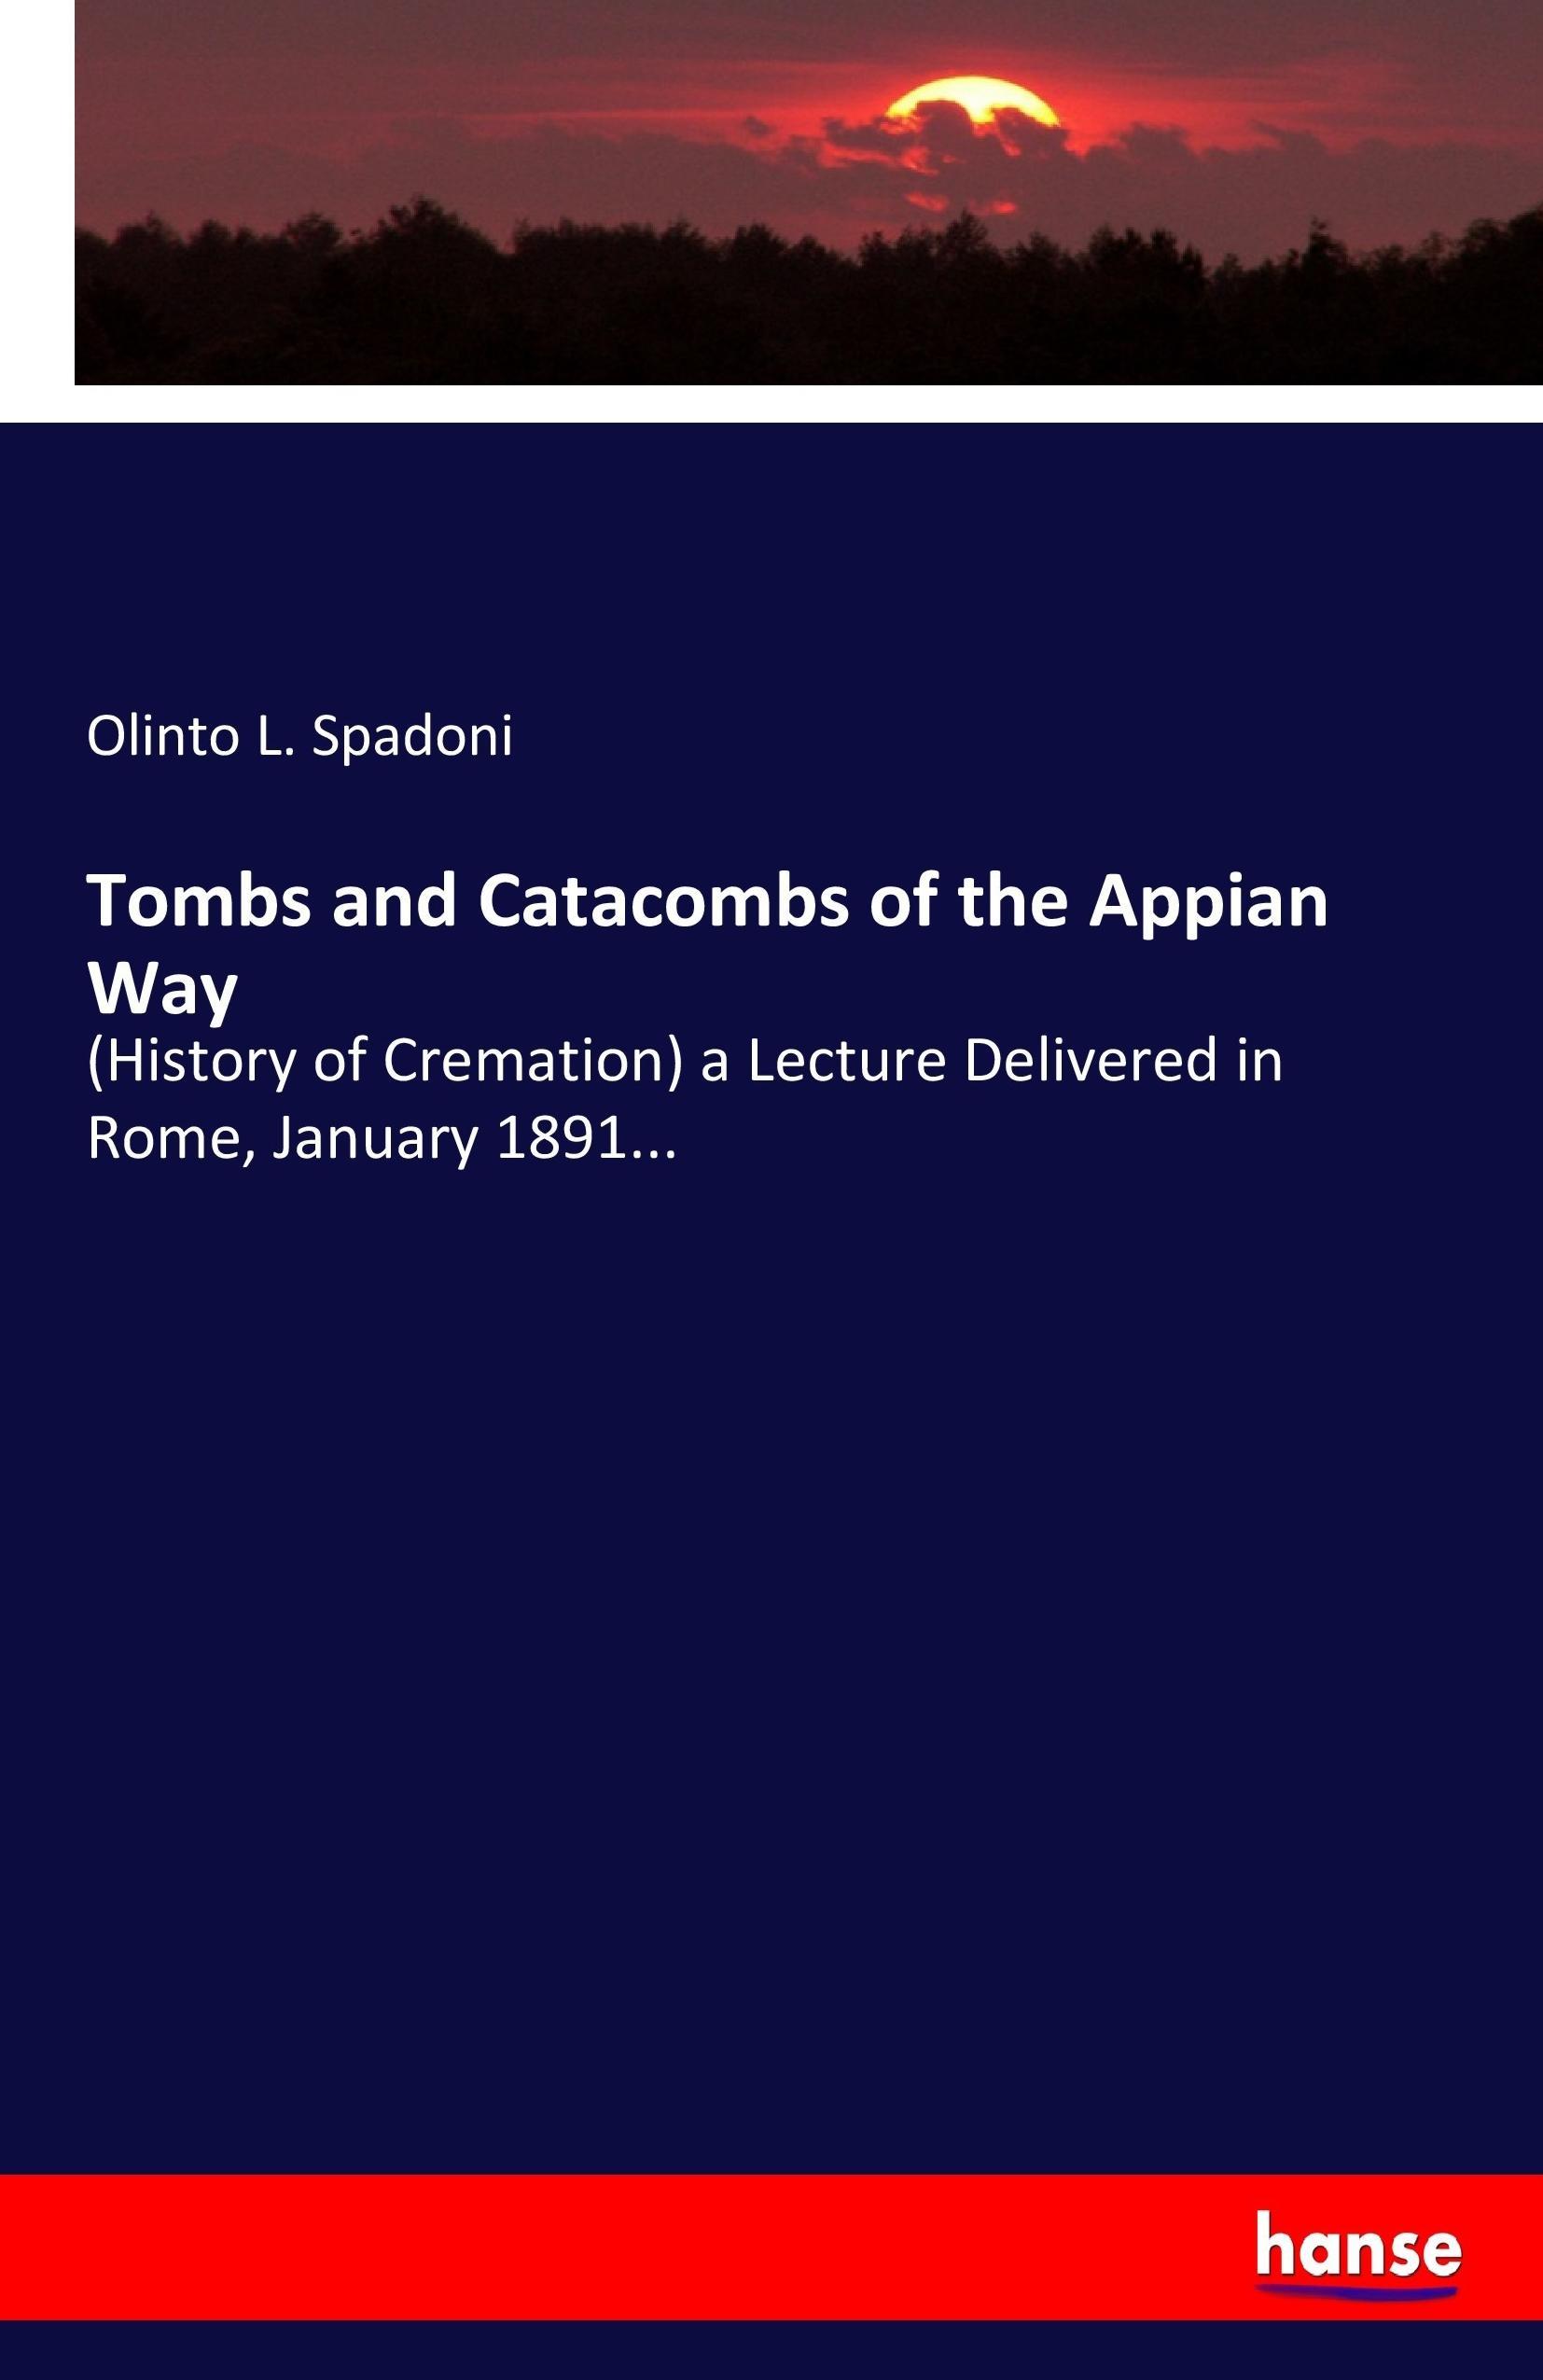 Tombs and Catacombs of the Appian Way - Spadoni, Olinto L.